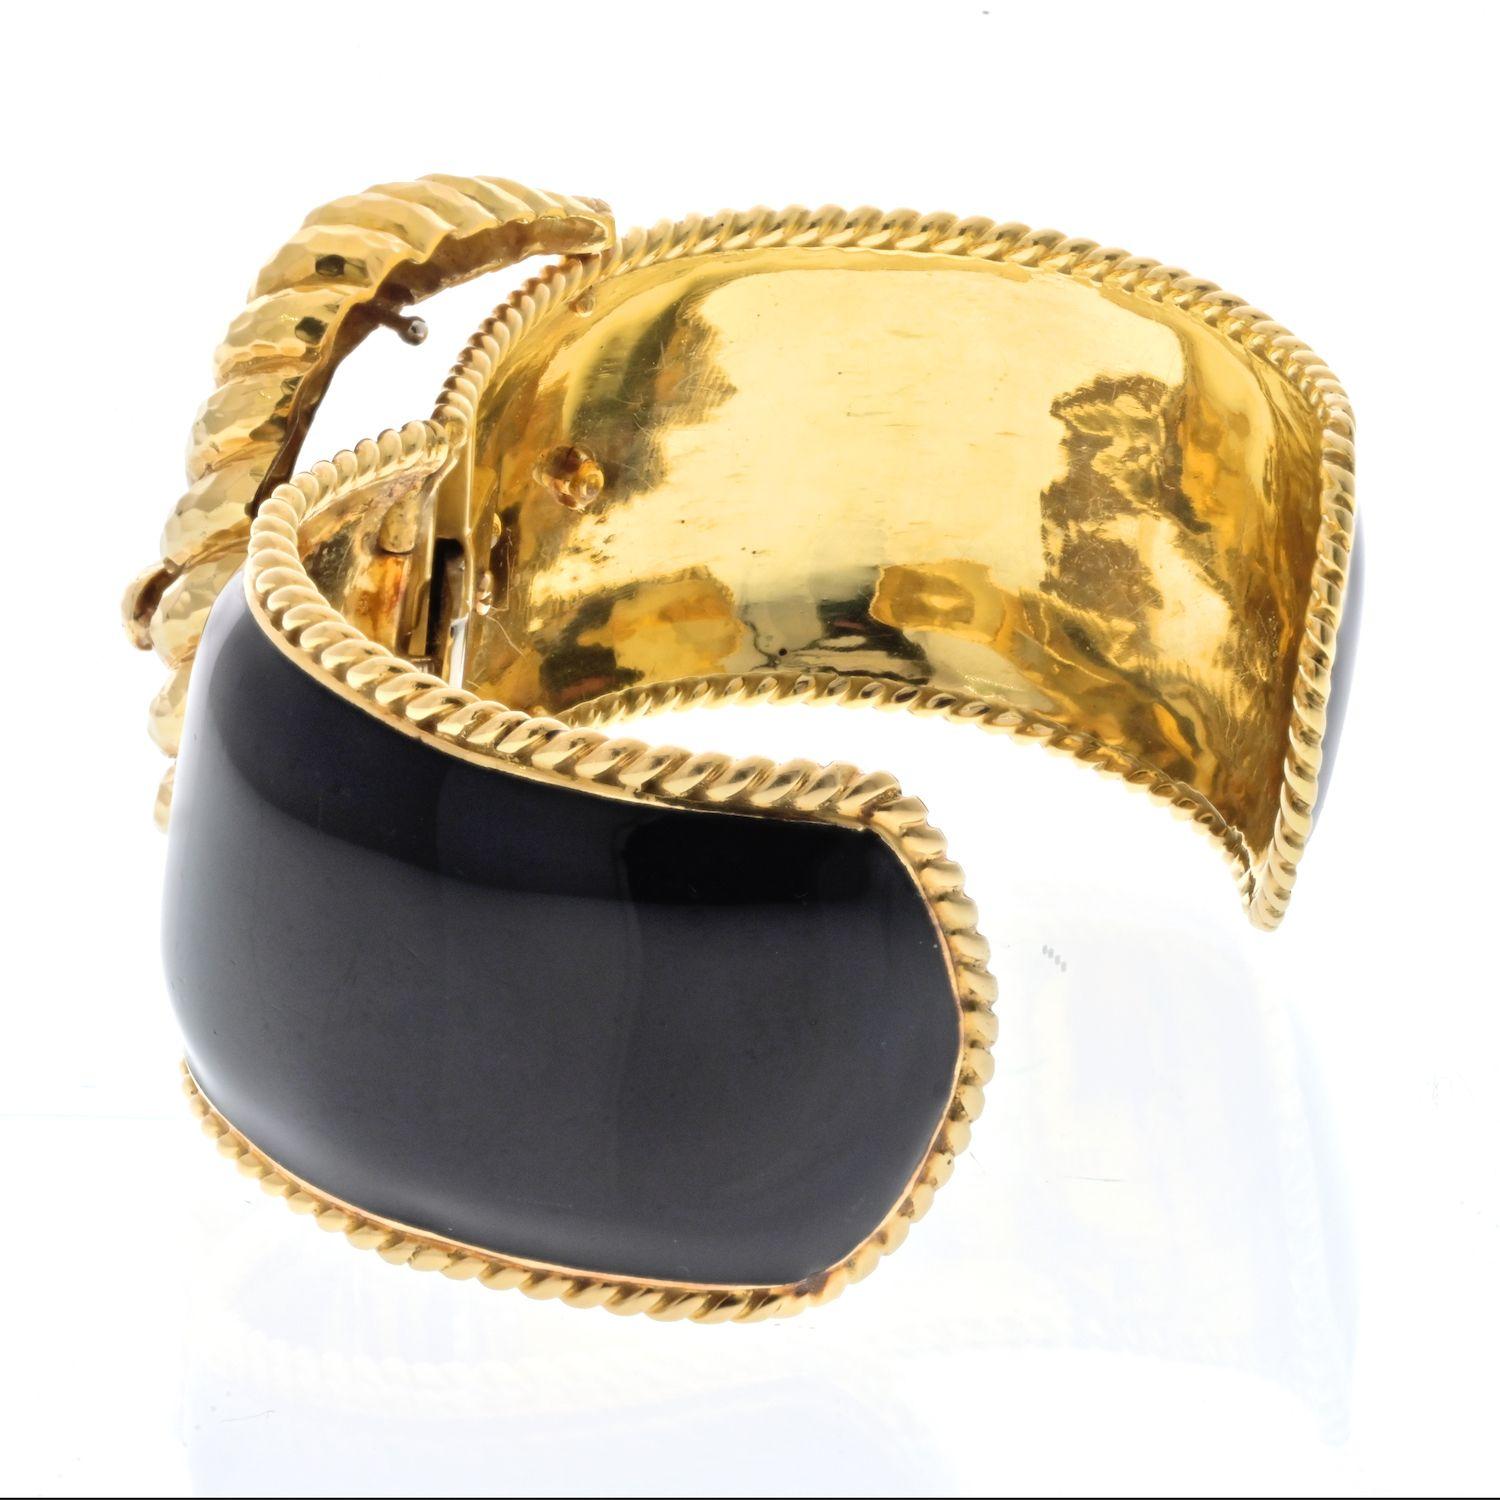 The David Webb 18k yellow gold cuff bracelet is a stunning piece of jewelry that exemplifies the brand's signature craftsmanship and unique design. Fashioned as an anchor buckle, the bracelet showcases a remarkable blend of elegance and nautical